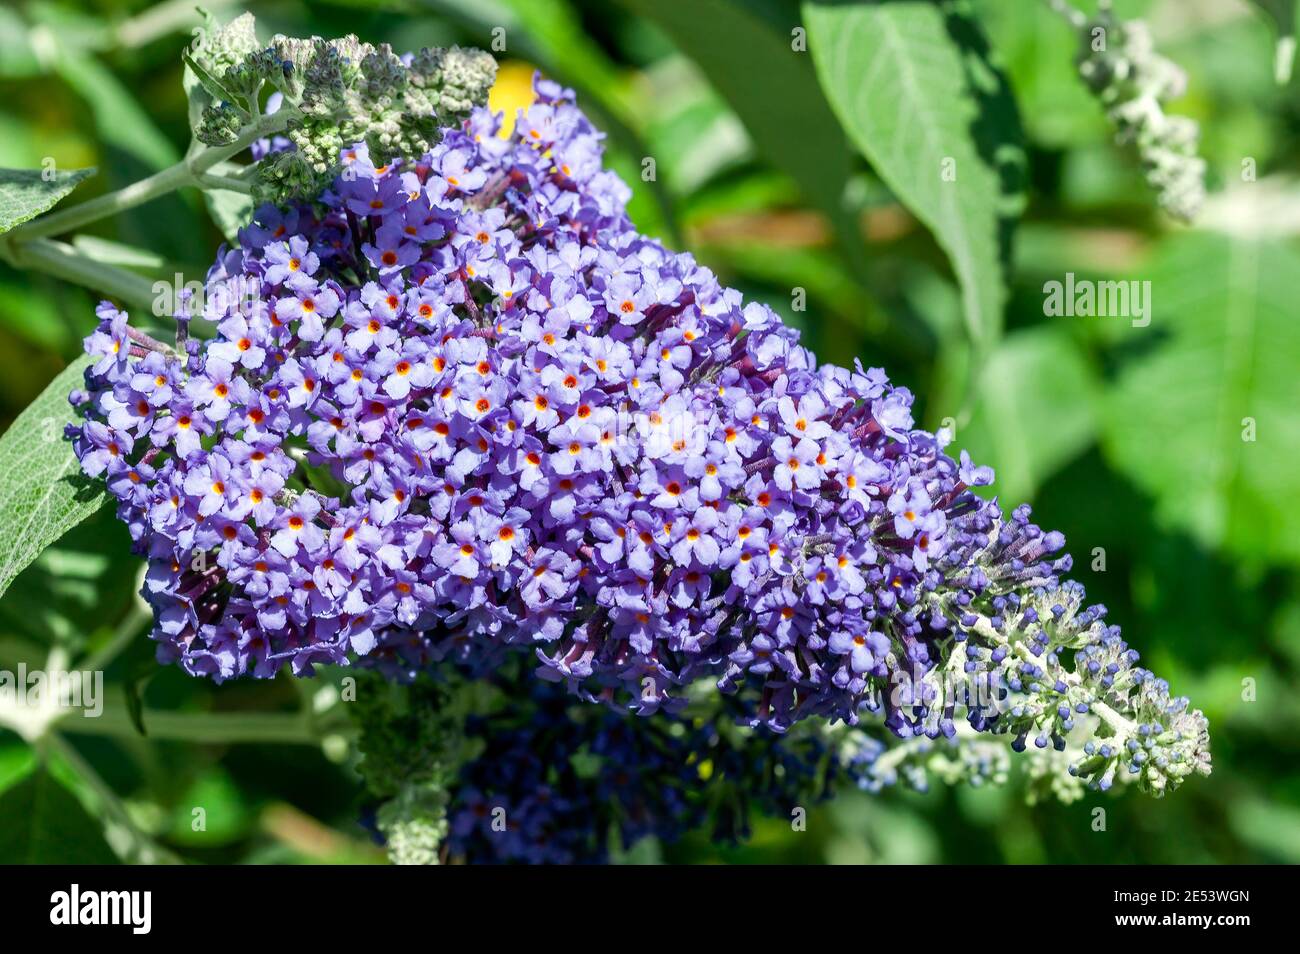 Buddleja fallowiana 'Lochinch' a summer flowering shrub plant with a purple summertime flower commonly known as butterfly bush which is in bloom from Stock Photo